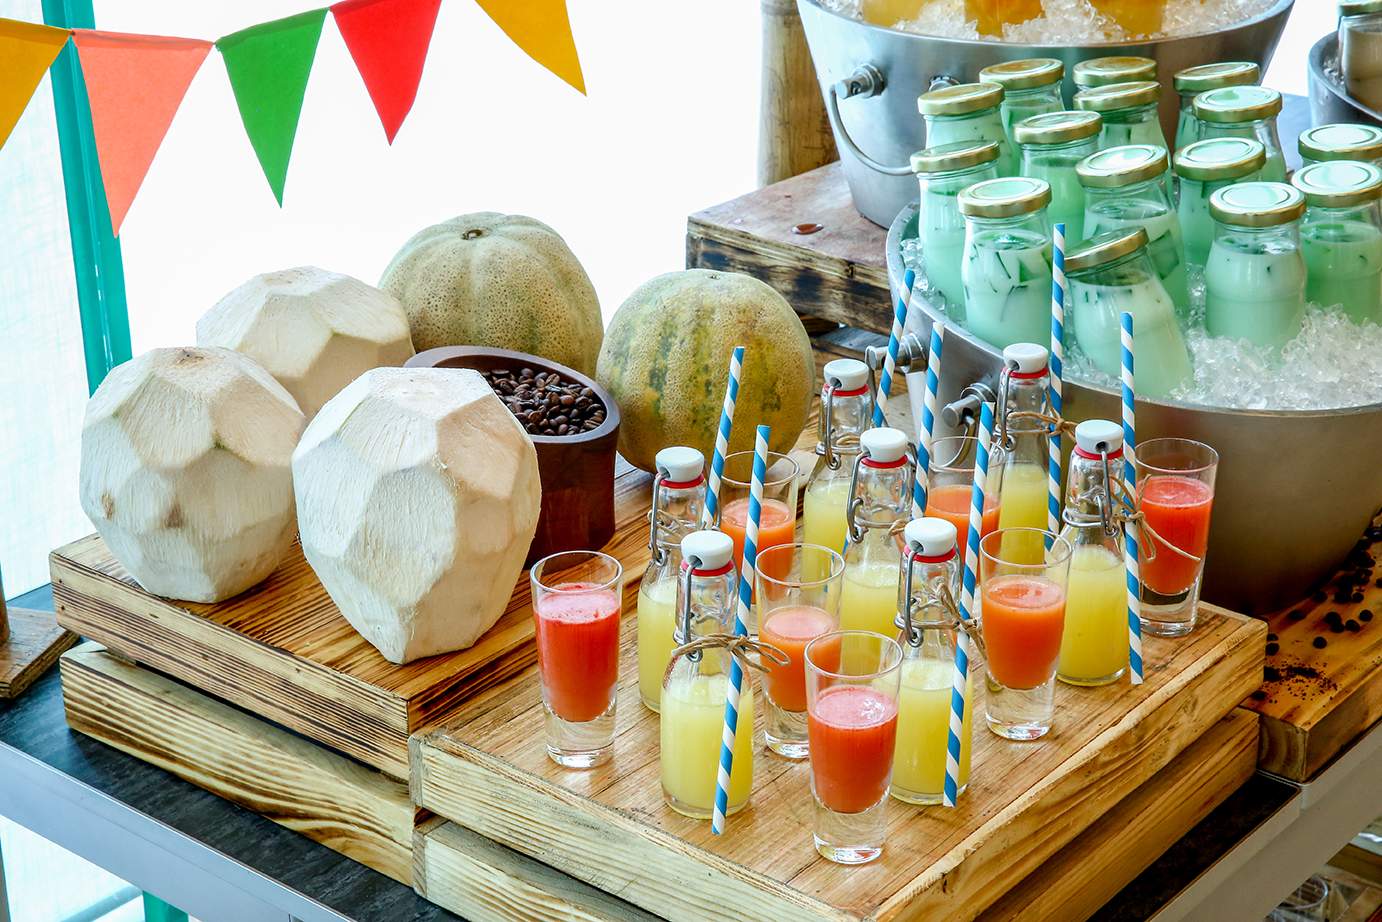 Fresh juices and sodas complement the Sunday brunch